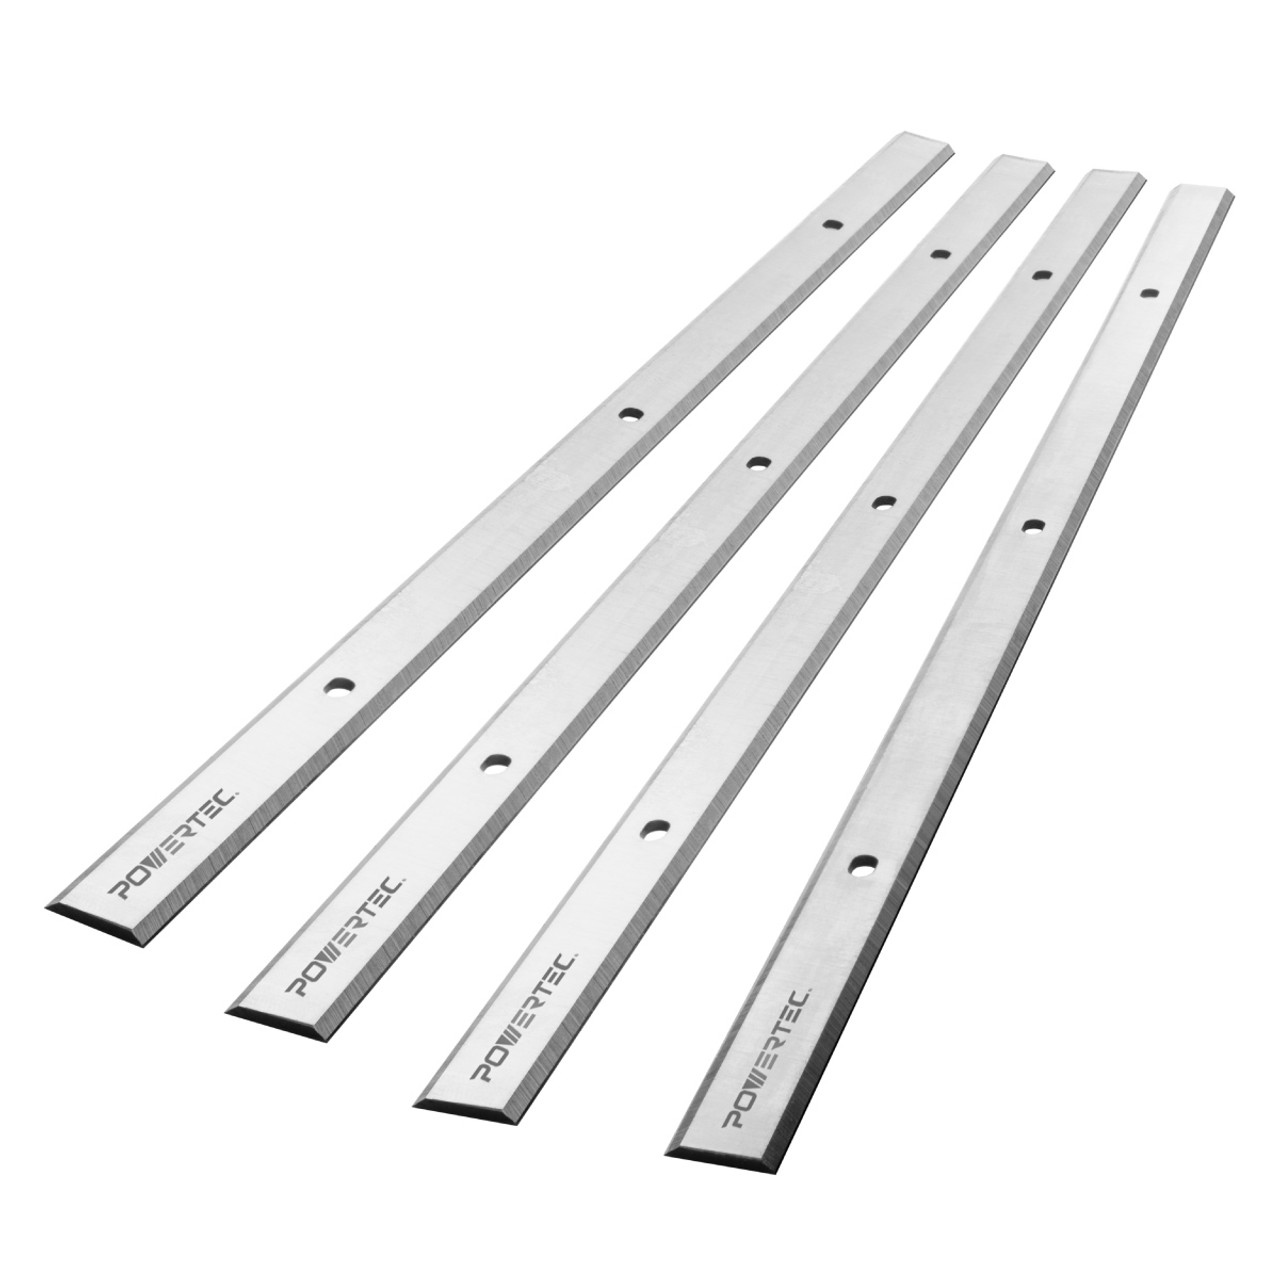 Powertec 13 Inch HSS Replacement Planer Blades for the Delta Planer 22-549,  22-555, 22-580 and Grizzly G0689